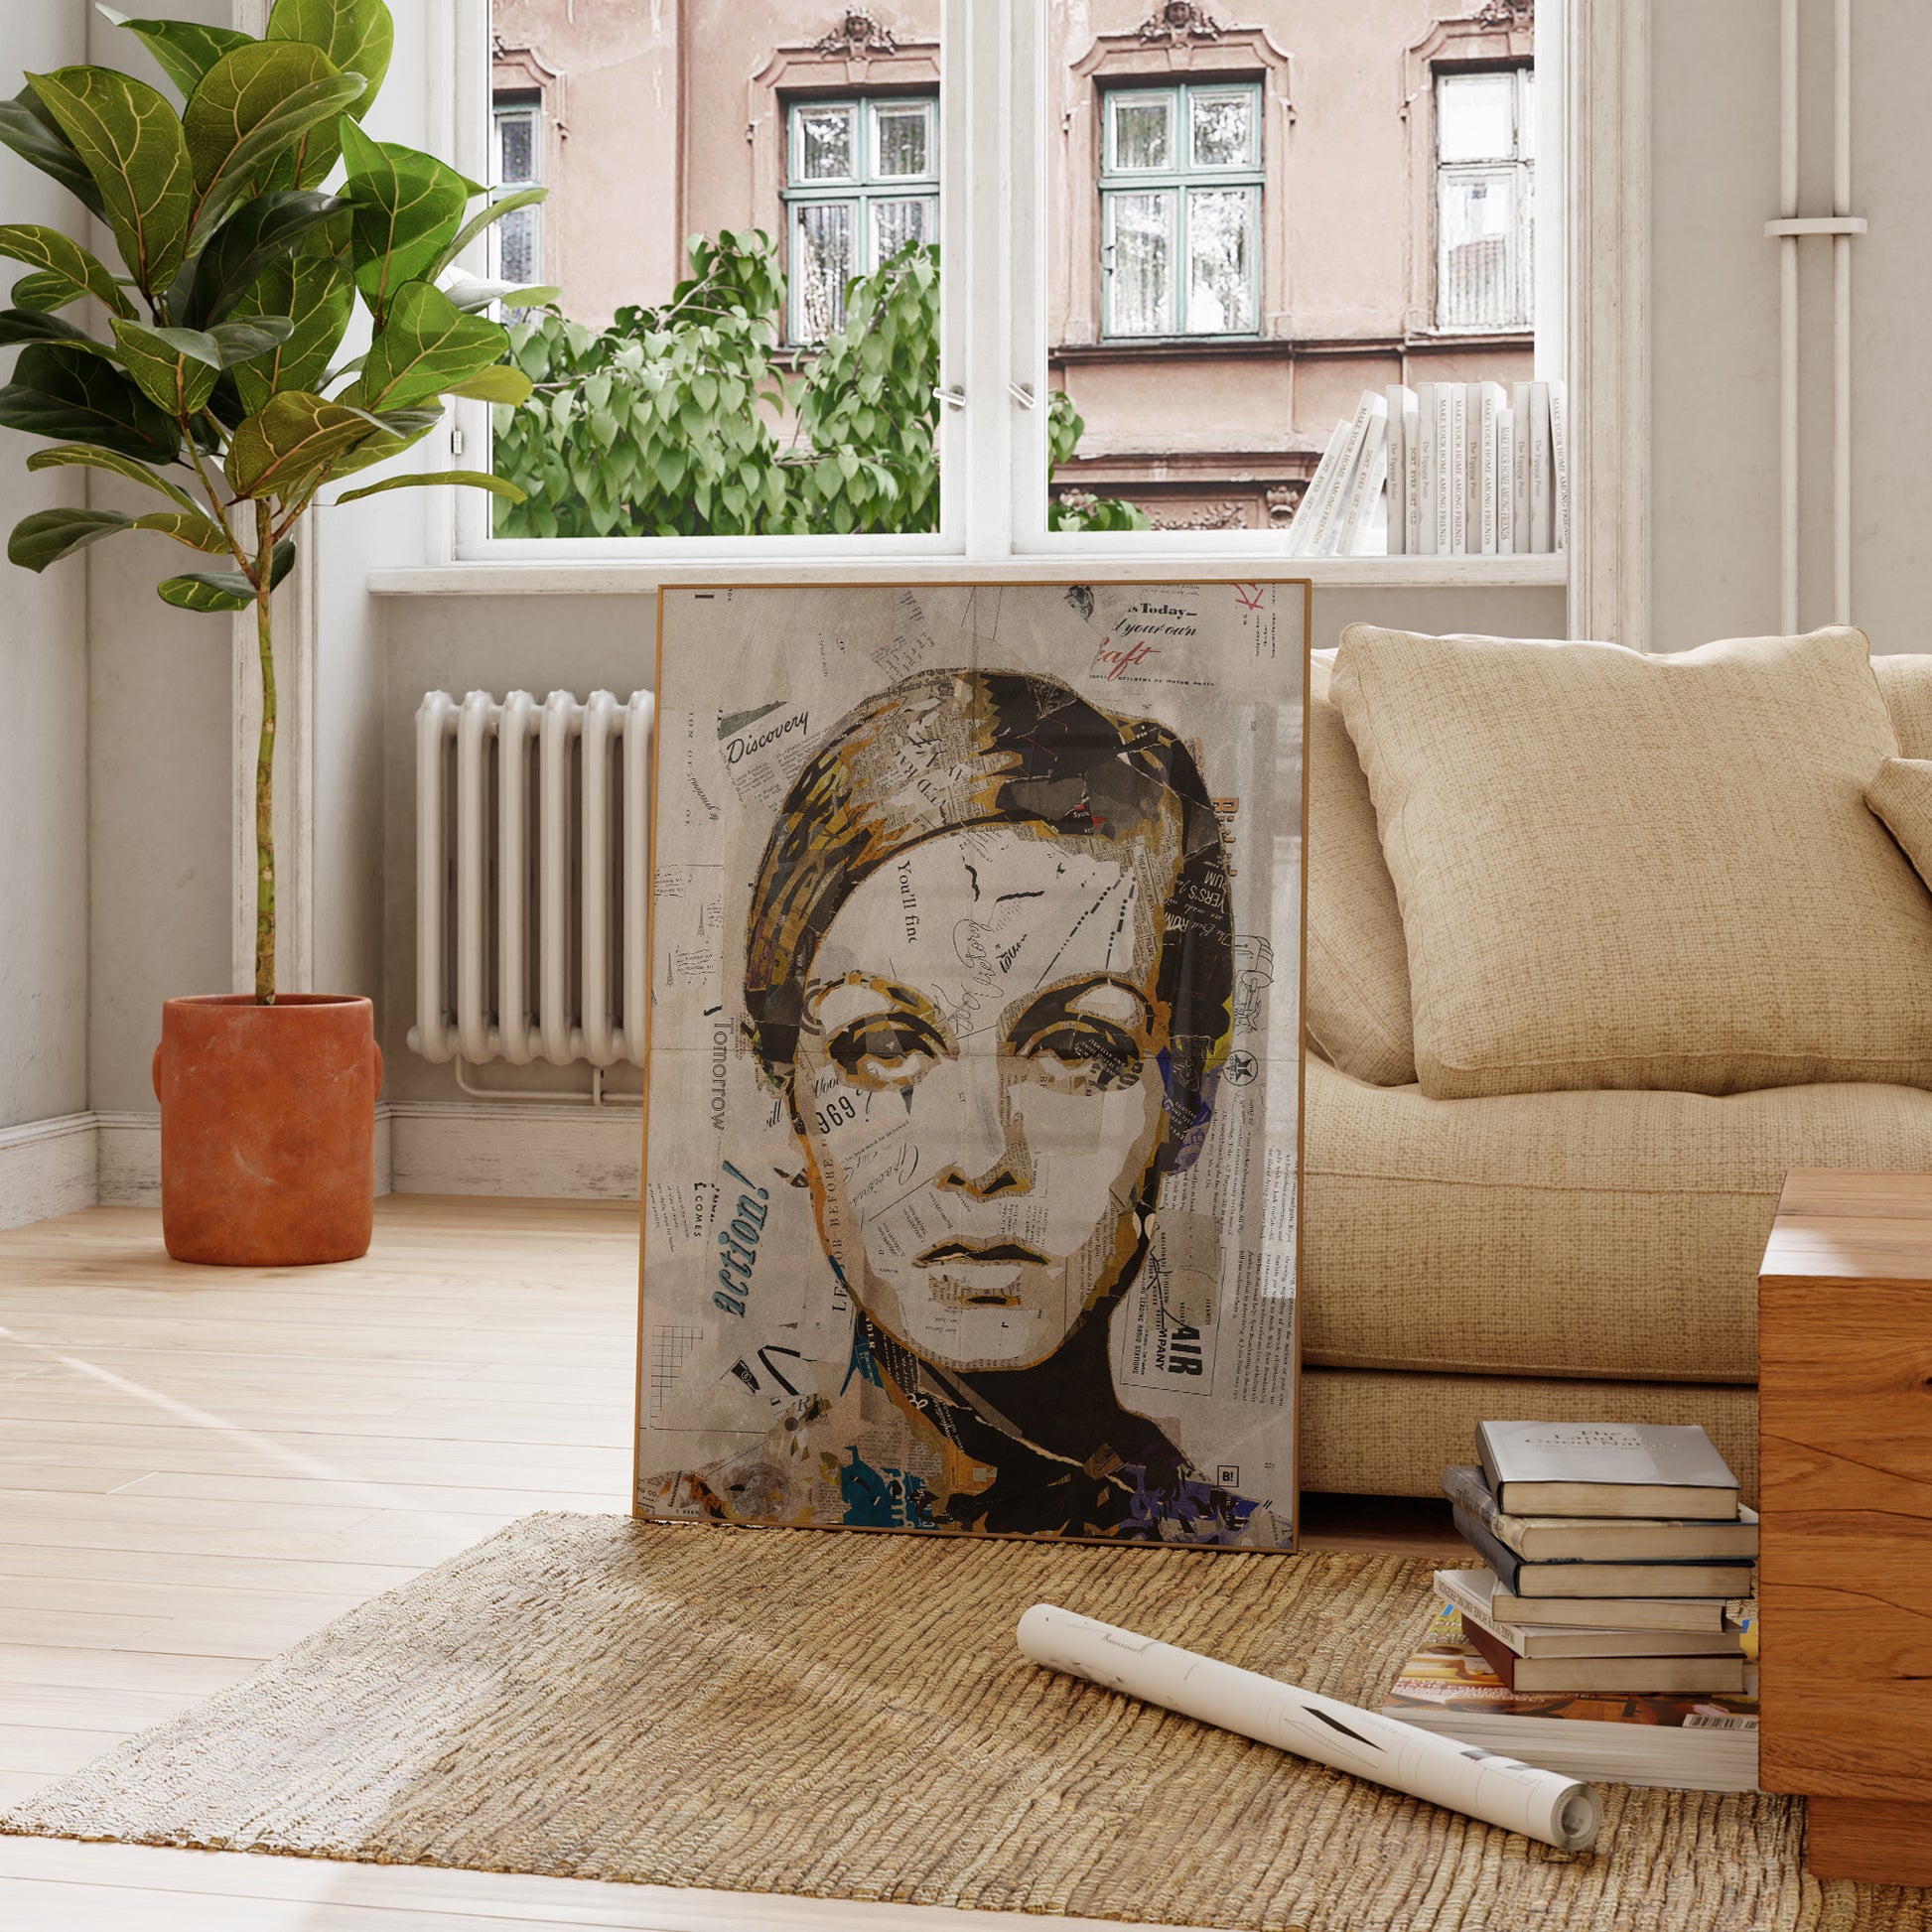 Be inspired by our iconic collage portrait art print of Twiggy. This artwork was printed using the giclée process on archival acid-free paper and is presented in a French living room, capturing its timeless beauty in every detail.